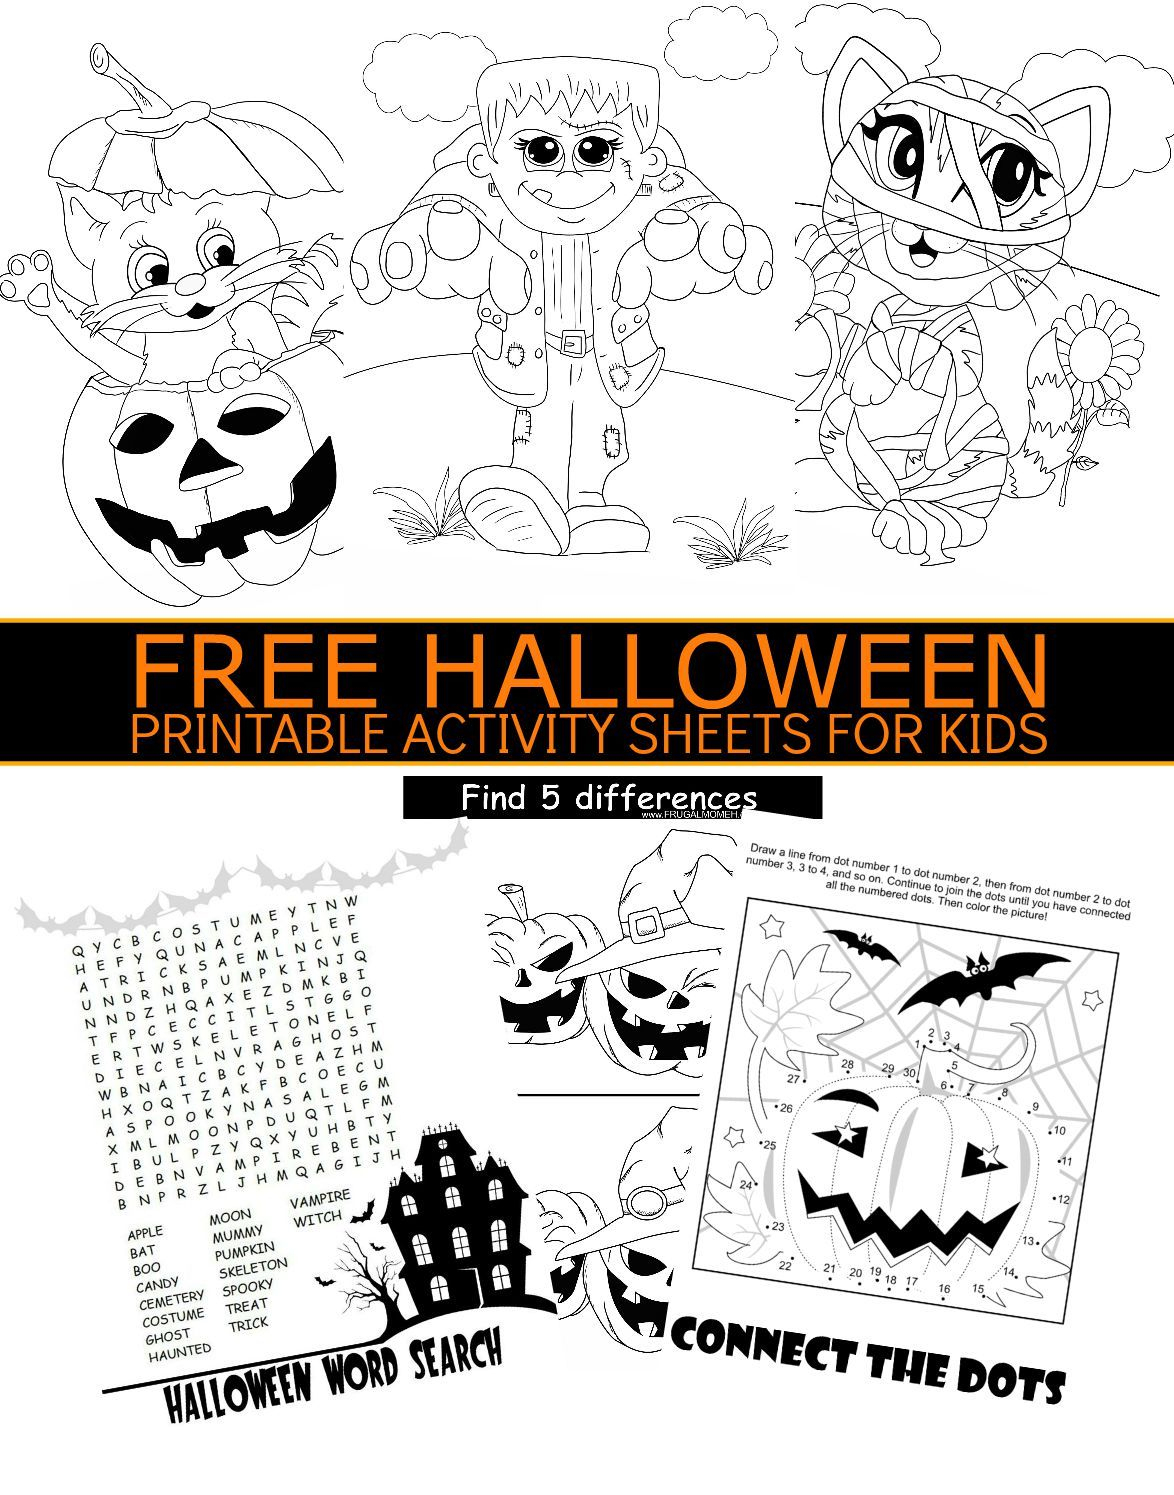 Free Halloween Printable Activity Sheets For Kids | Holidays - Free Printable Halloween Games For Kids